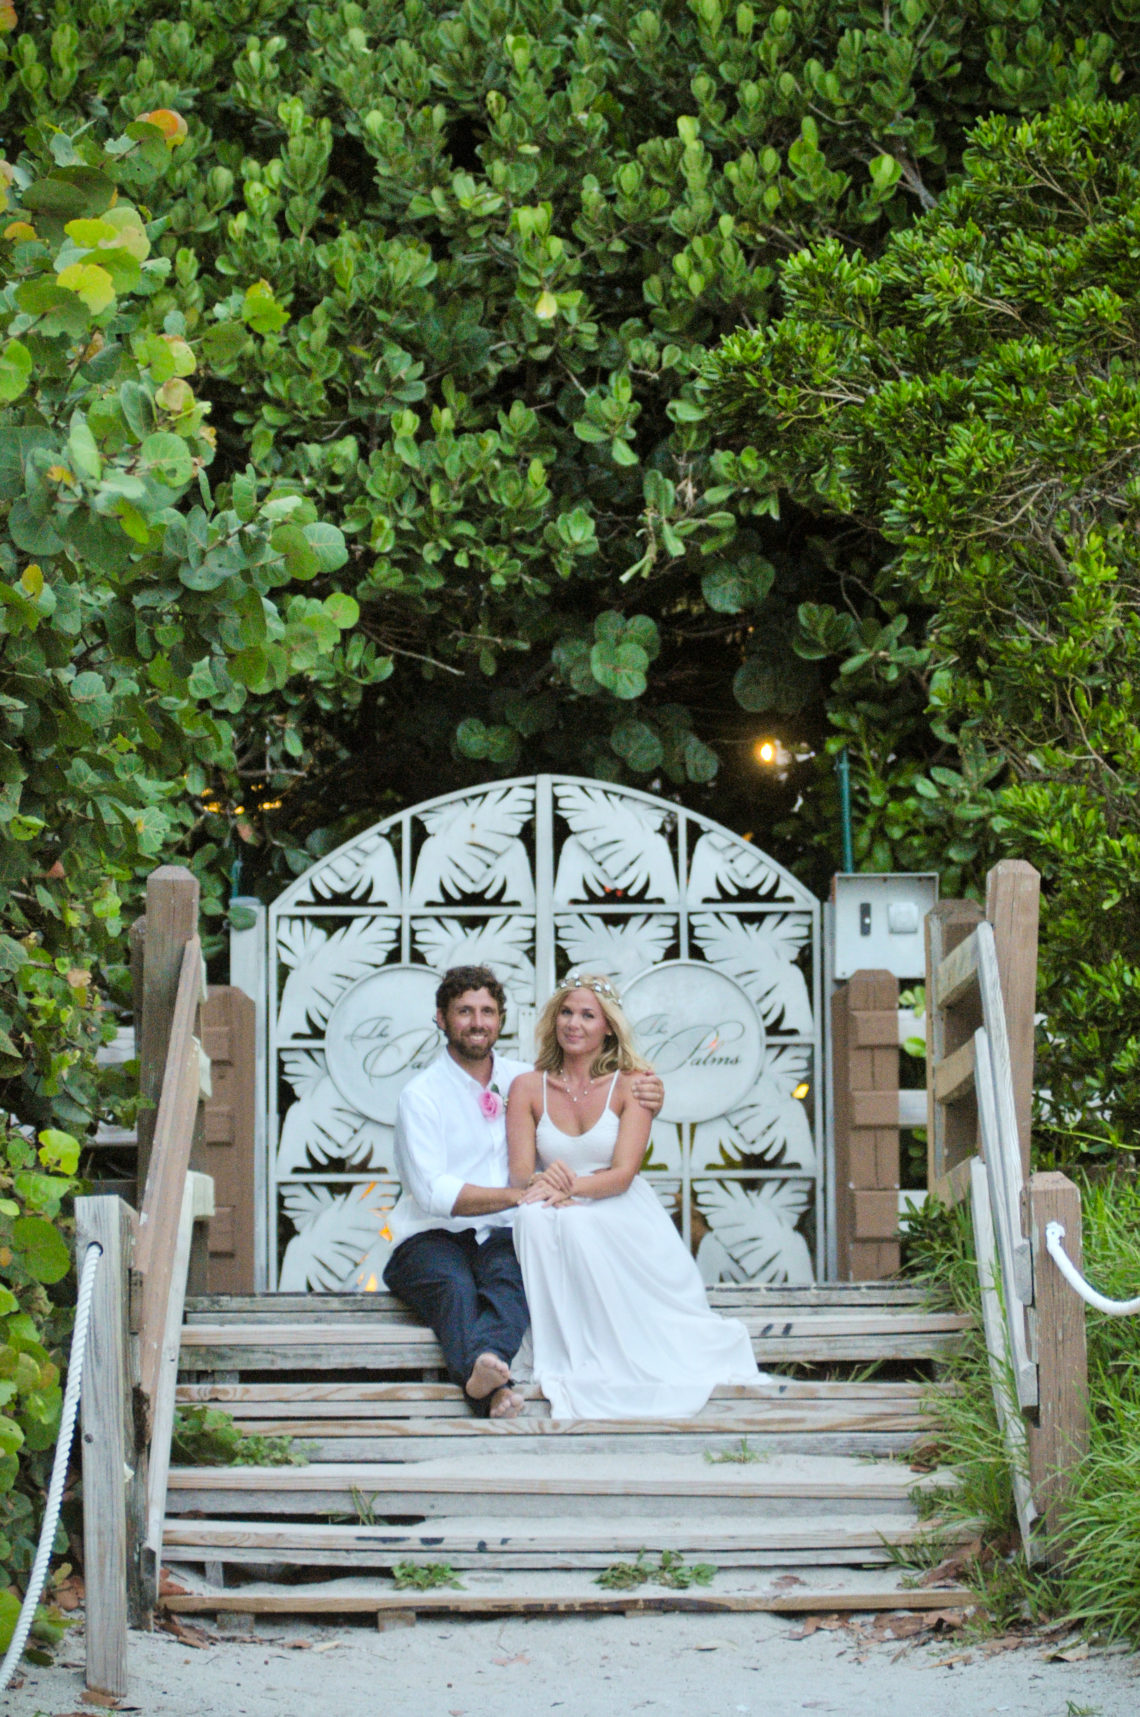 Ashley and Stephen's beautiful Miami Beach Wedding at sunset - sitting on stairs and smiling.